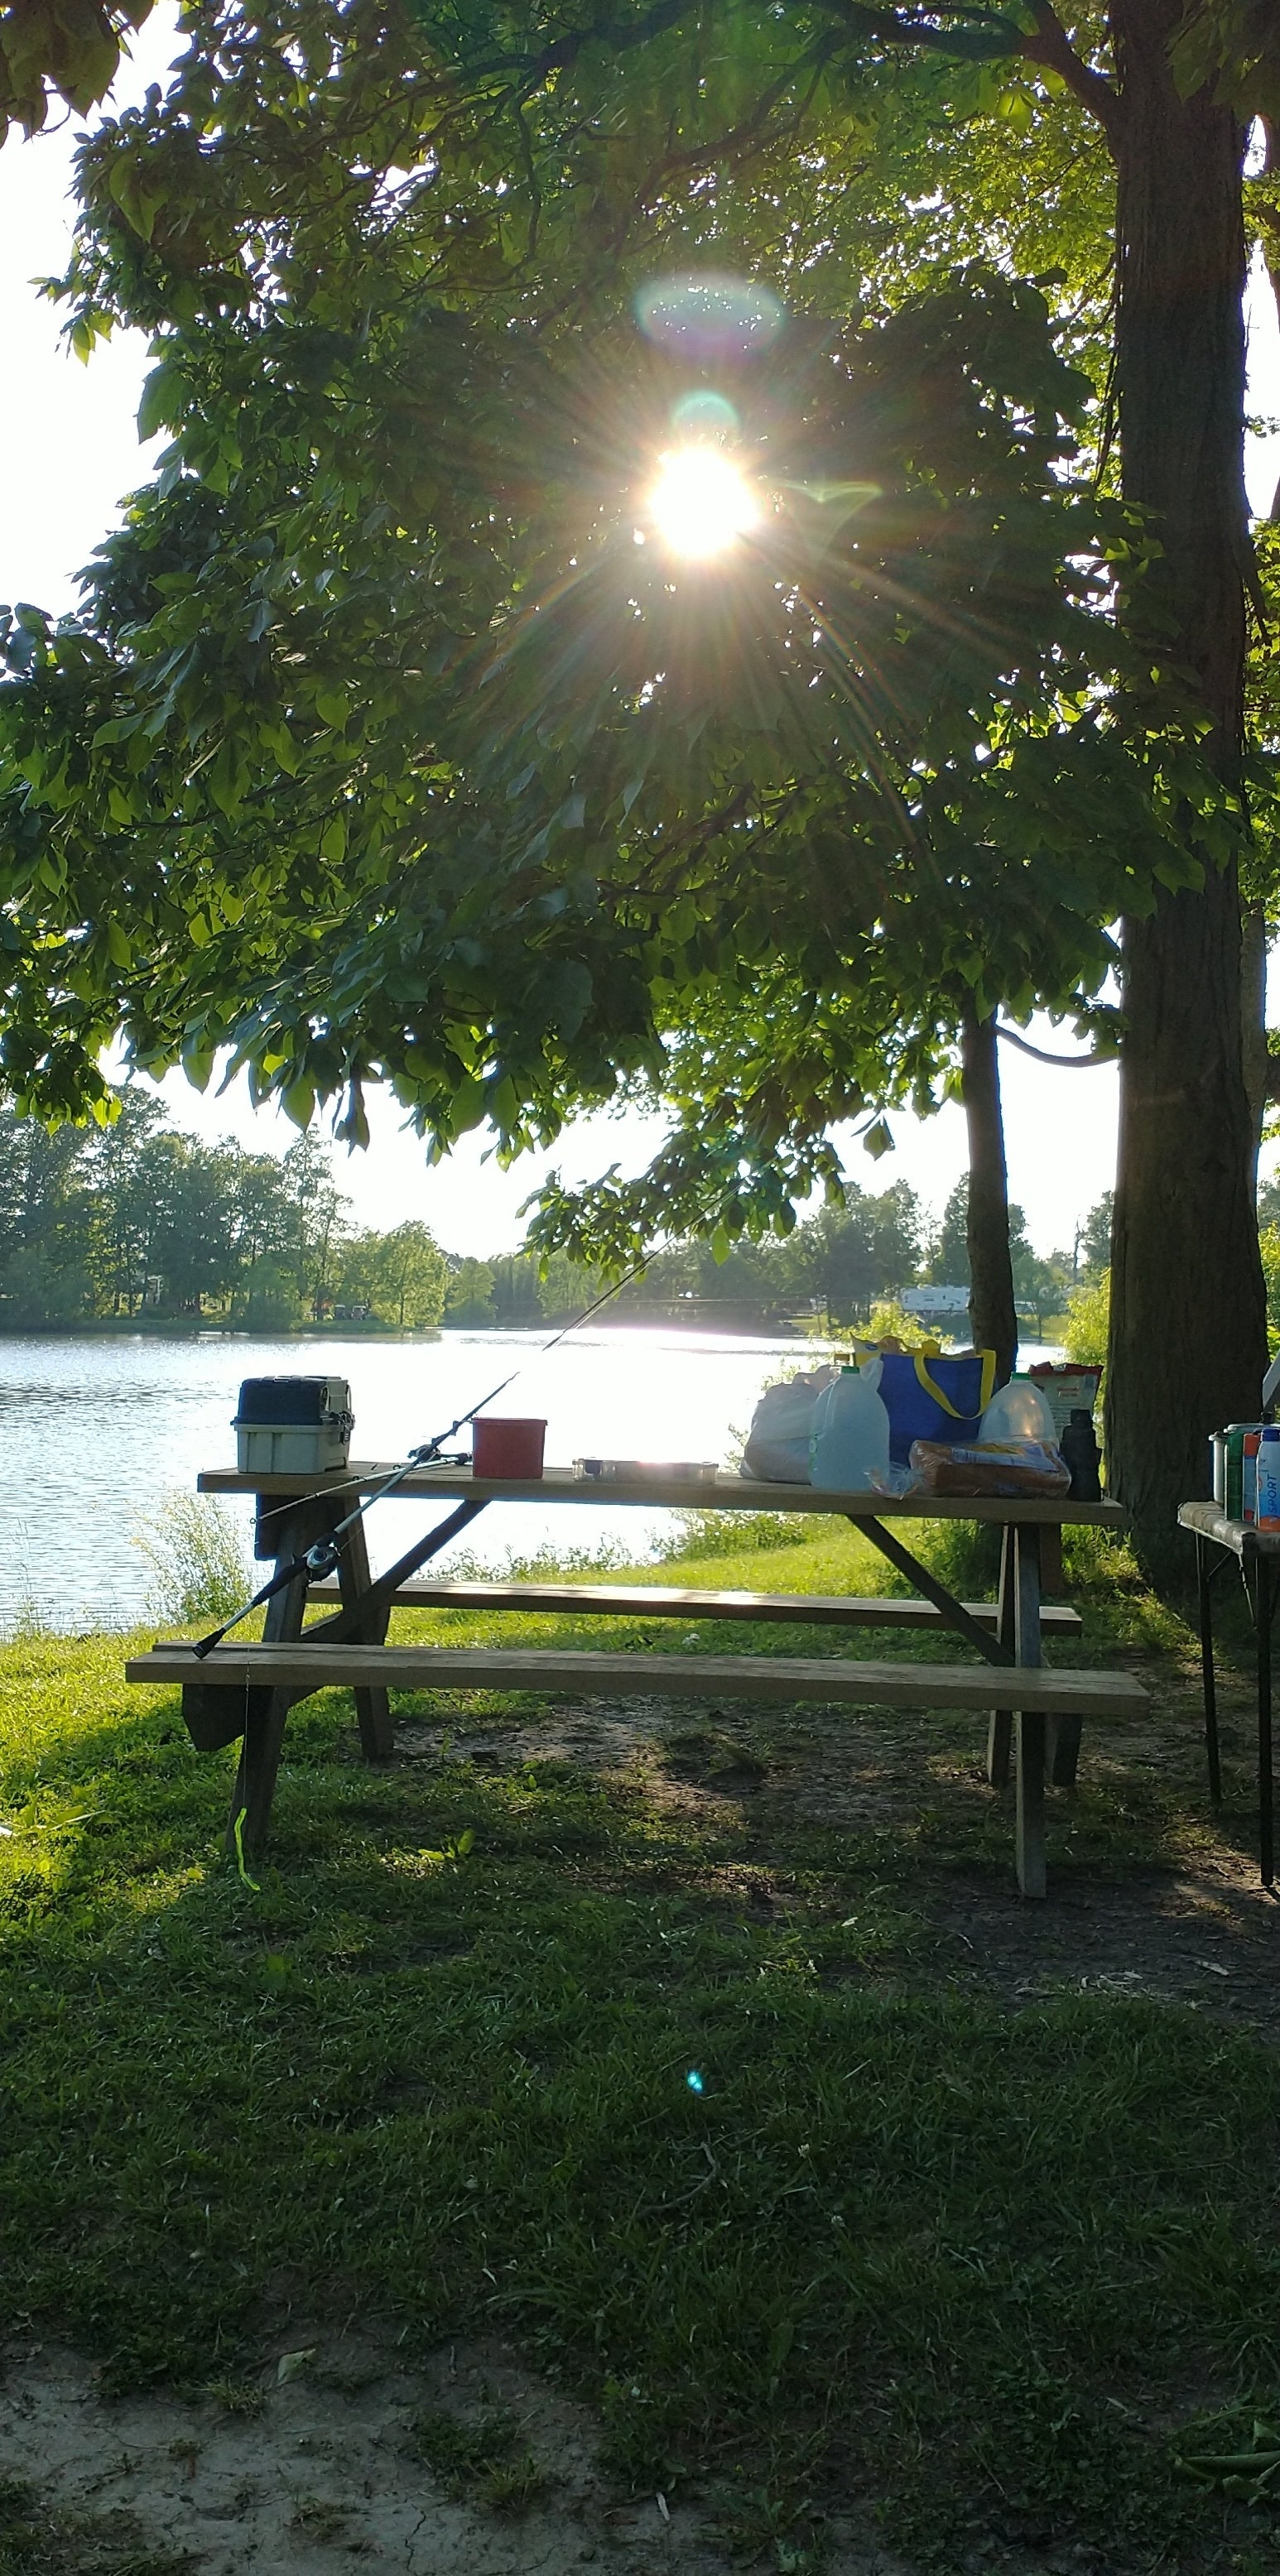 Camper submitted image from Camp Timber Lake - 4